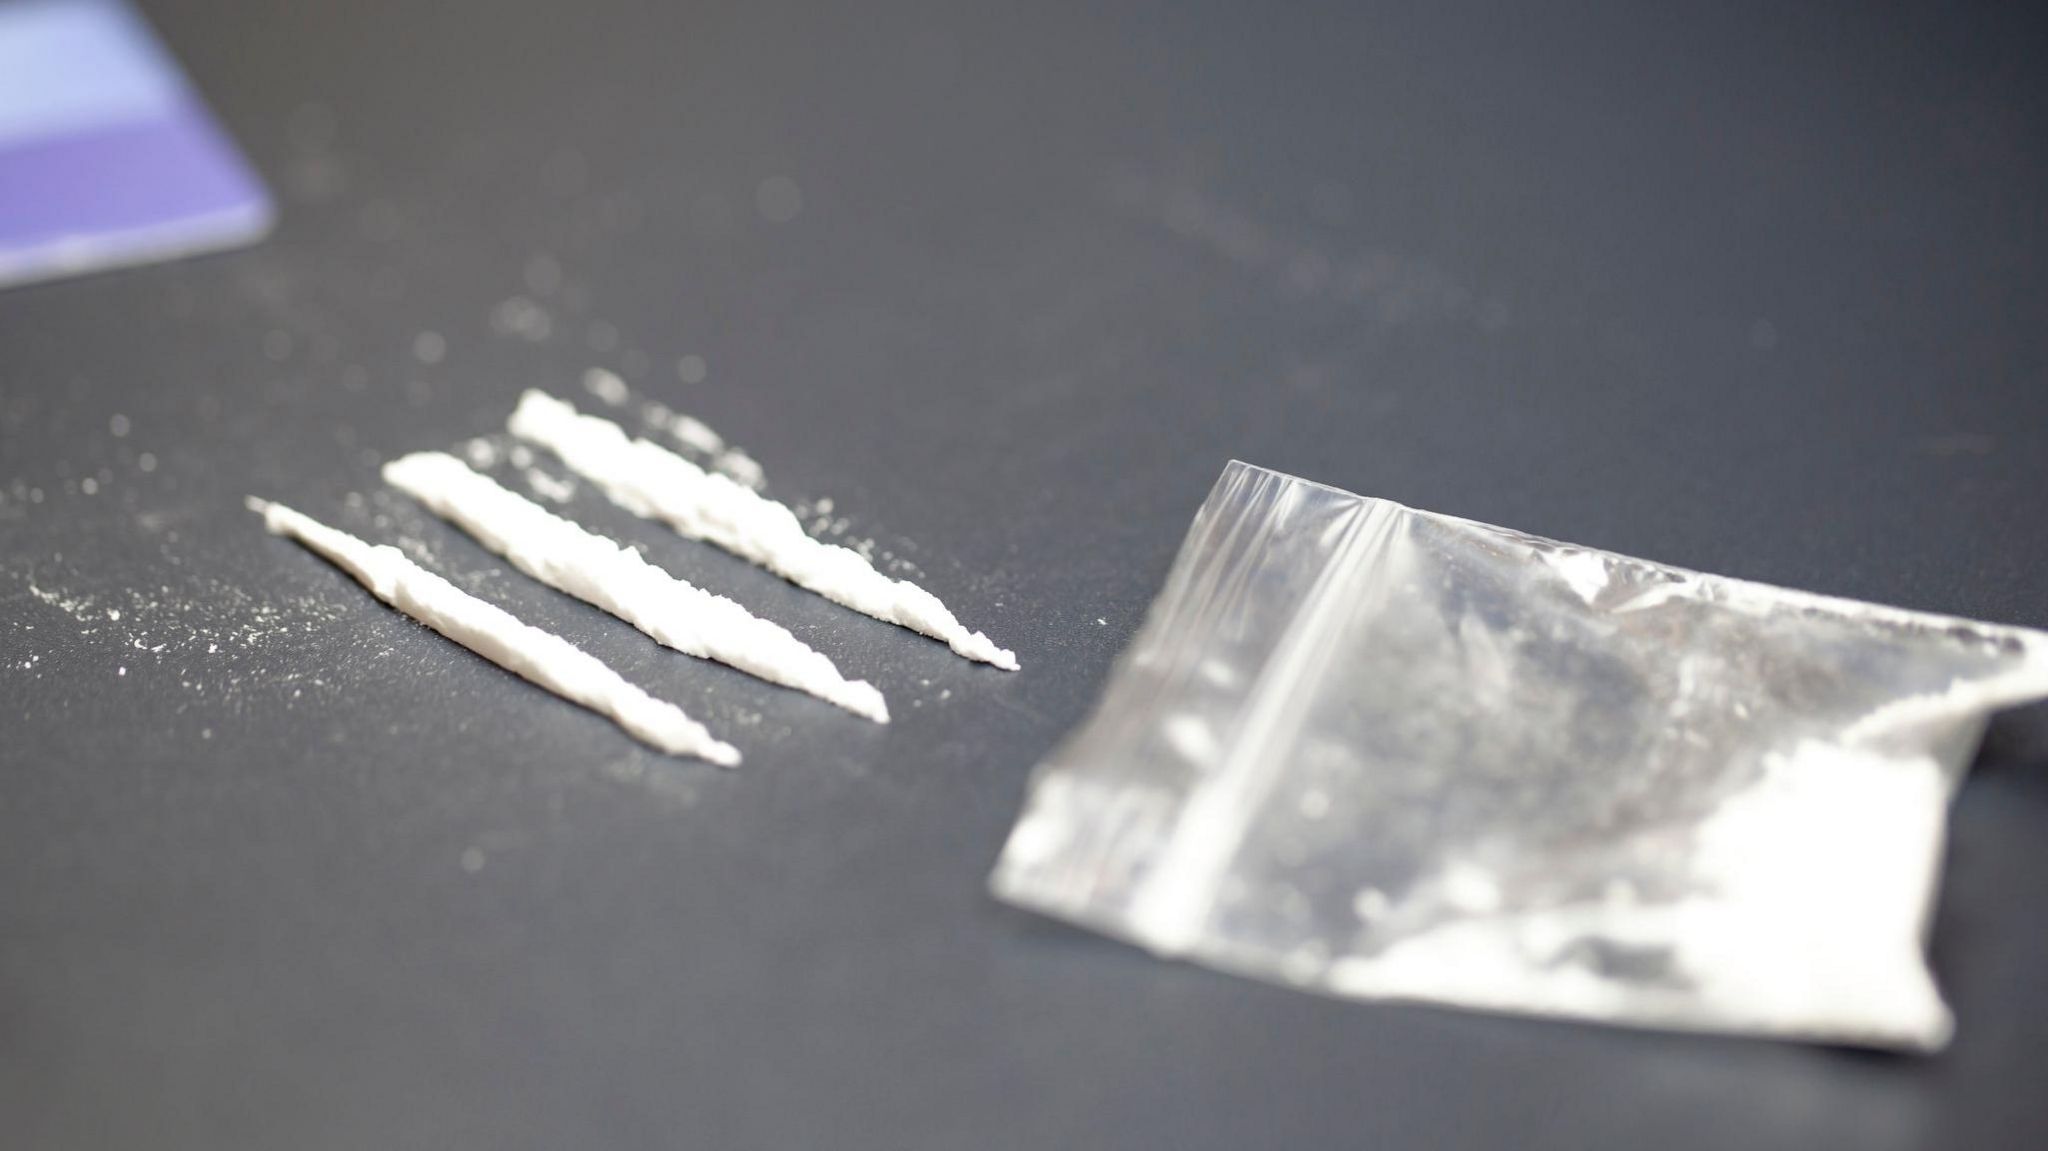 Bag containing cocaine and three lines on a tabletop